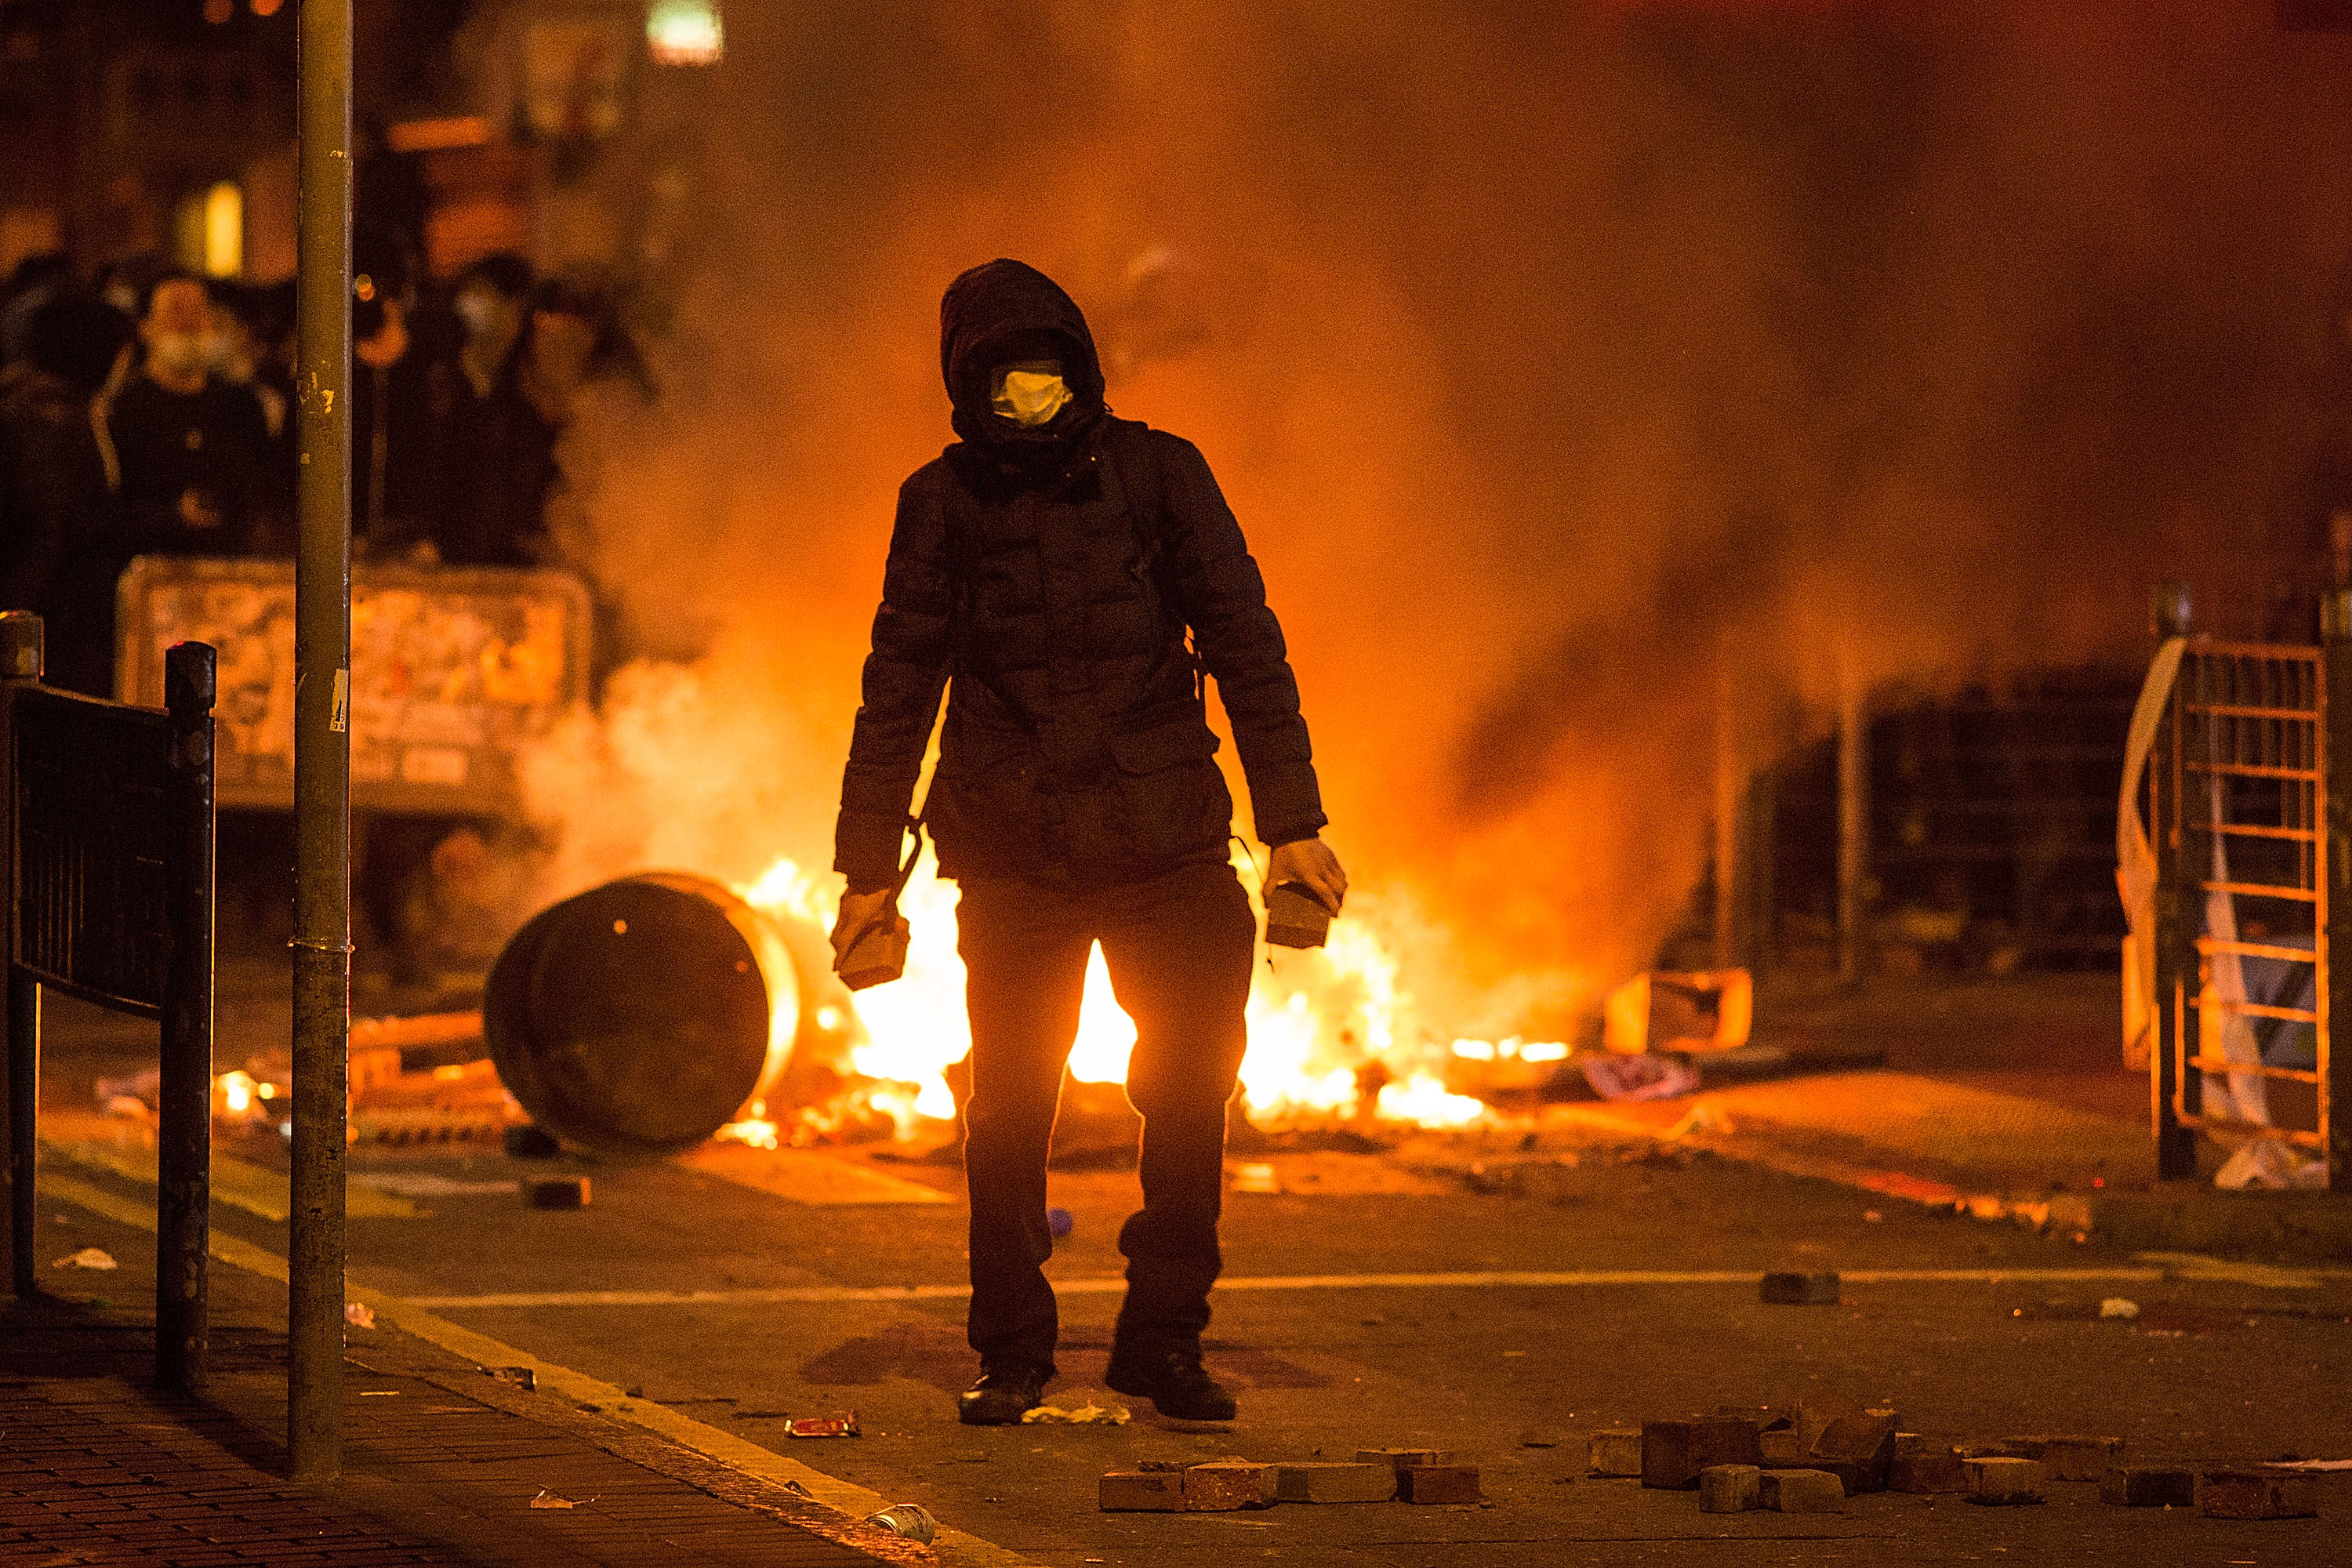 Rioters set fires in Mong Kok district of Hong Kong on Feb. 9, 2016 (Lam Yik Fei—Getty Images)